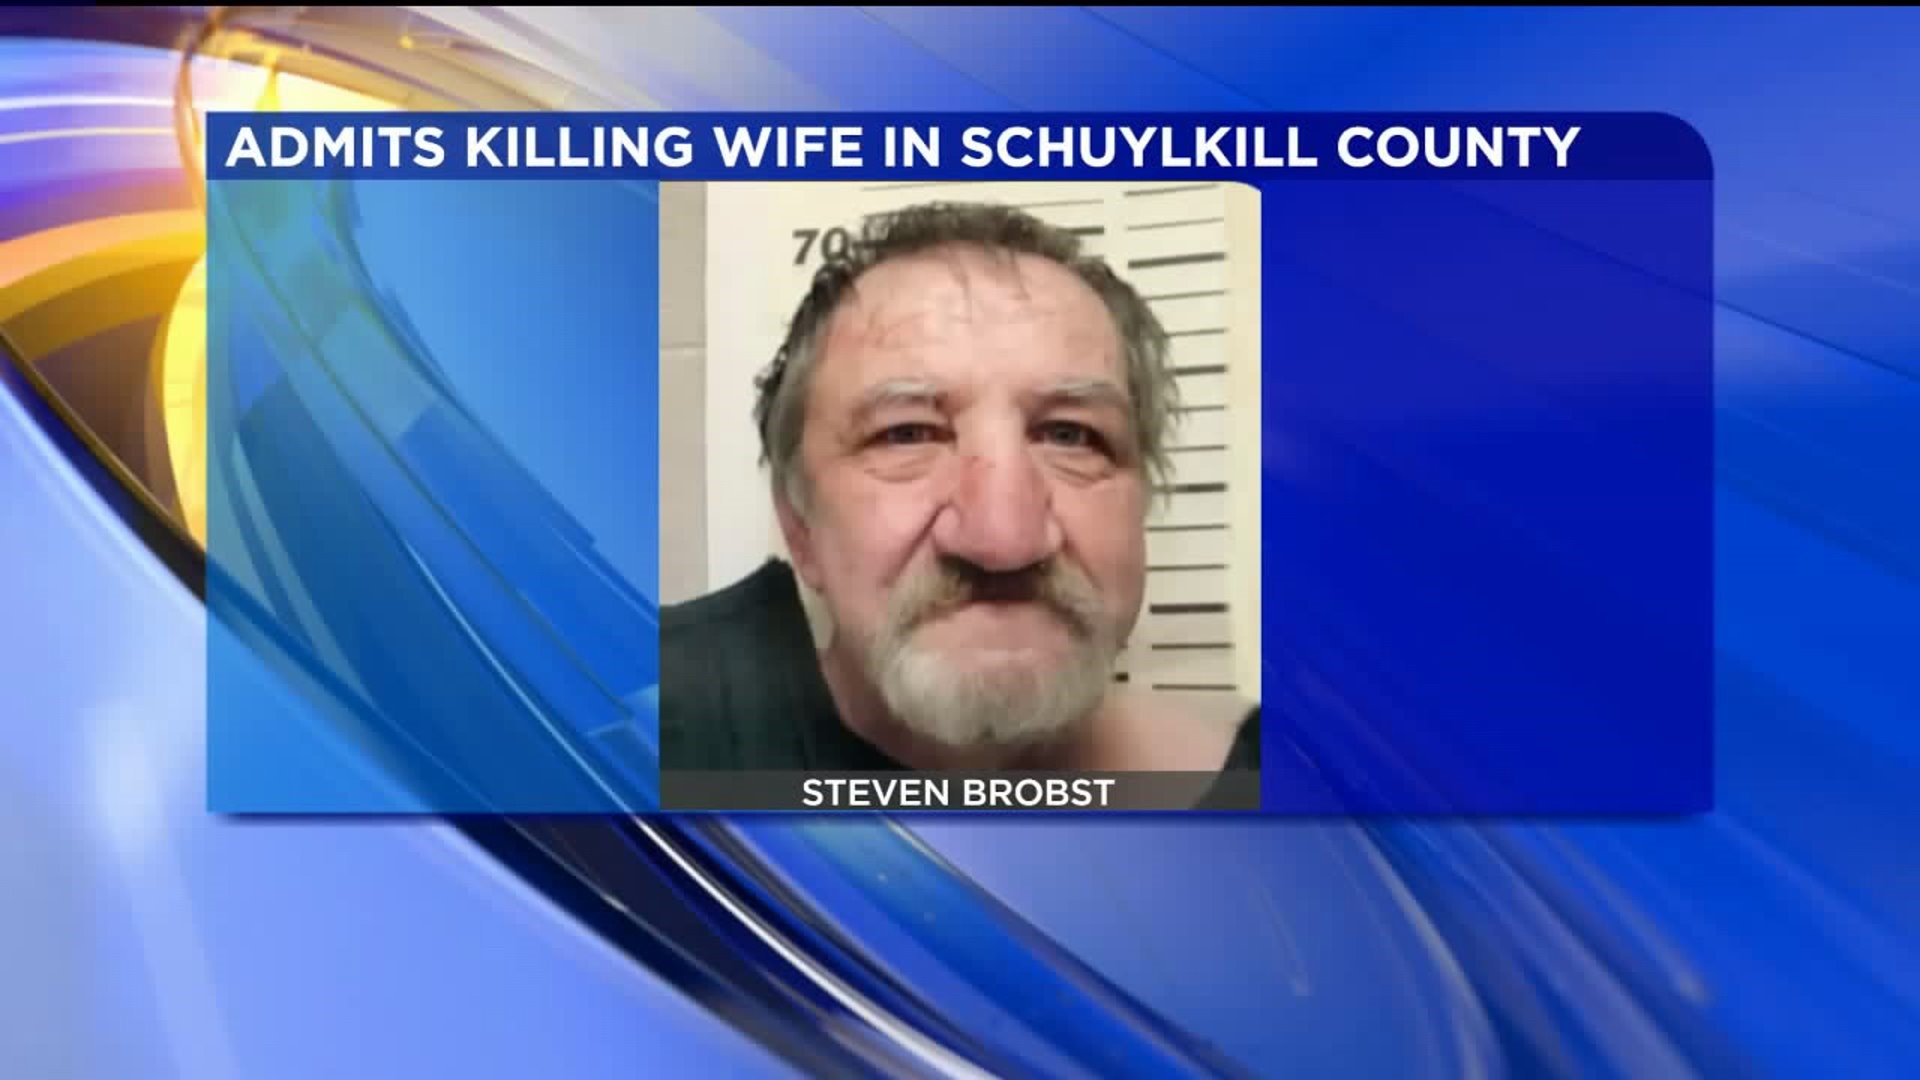 Man Admits Shooting, Killing Wife in Schuylkill County